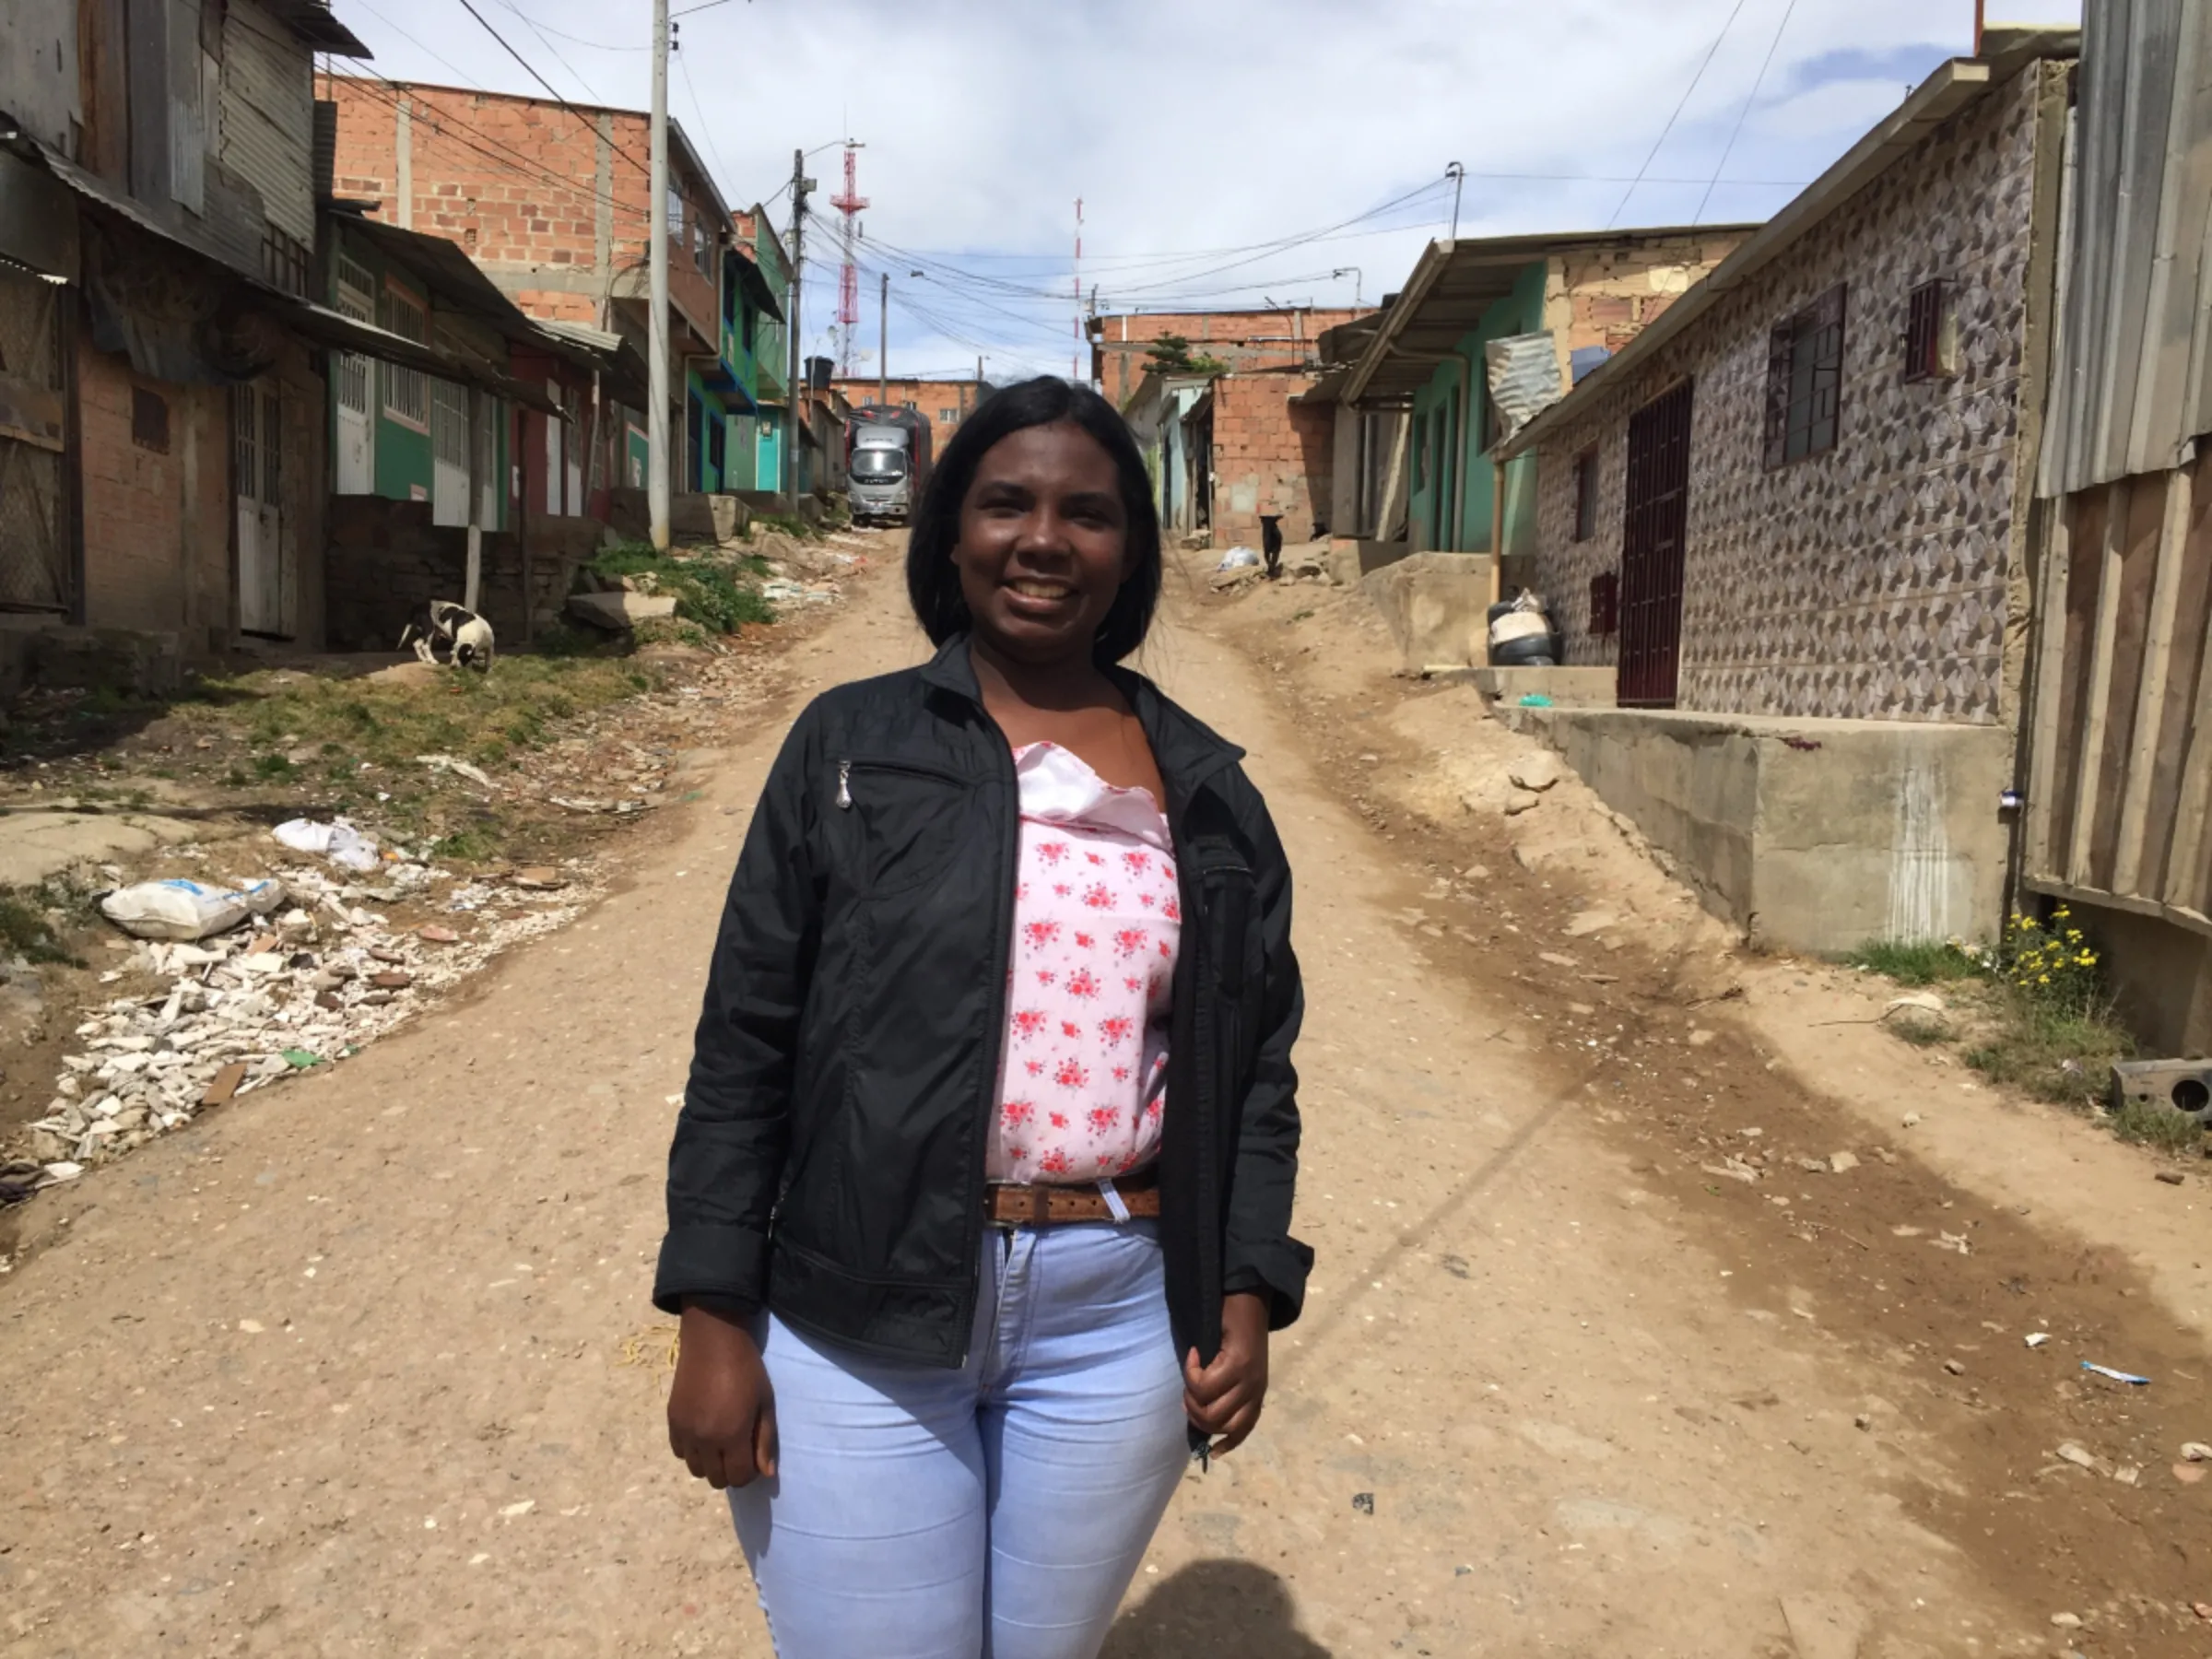 Venezuelan migrant Franmaryoli Hernandez in a street outside her rented home, Soacha, Colombia. July 23, 2021. Thomson Reuters Foundation/Anastasia Moloney